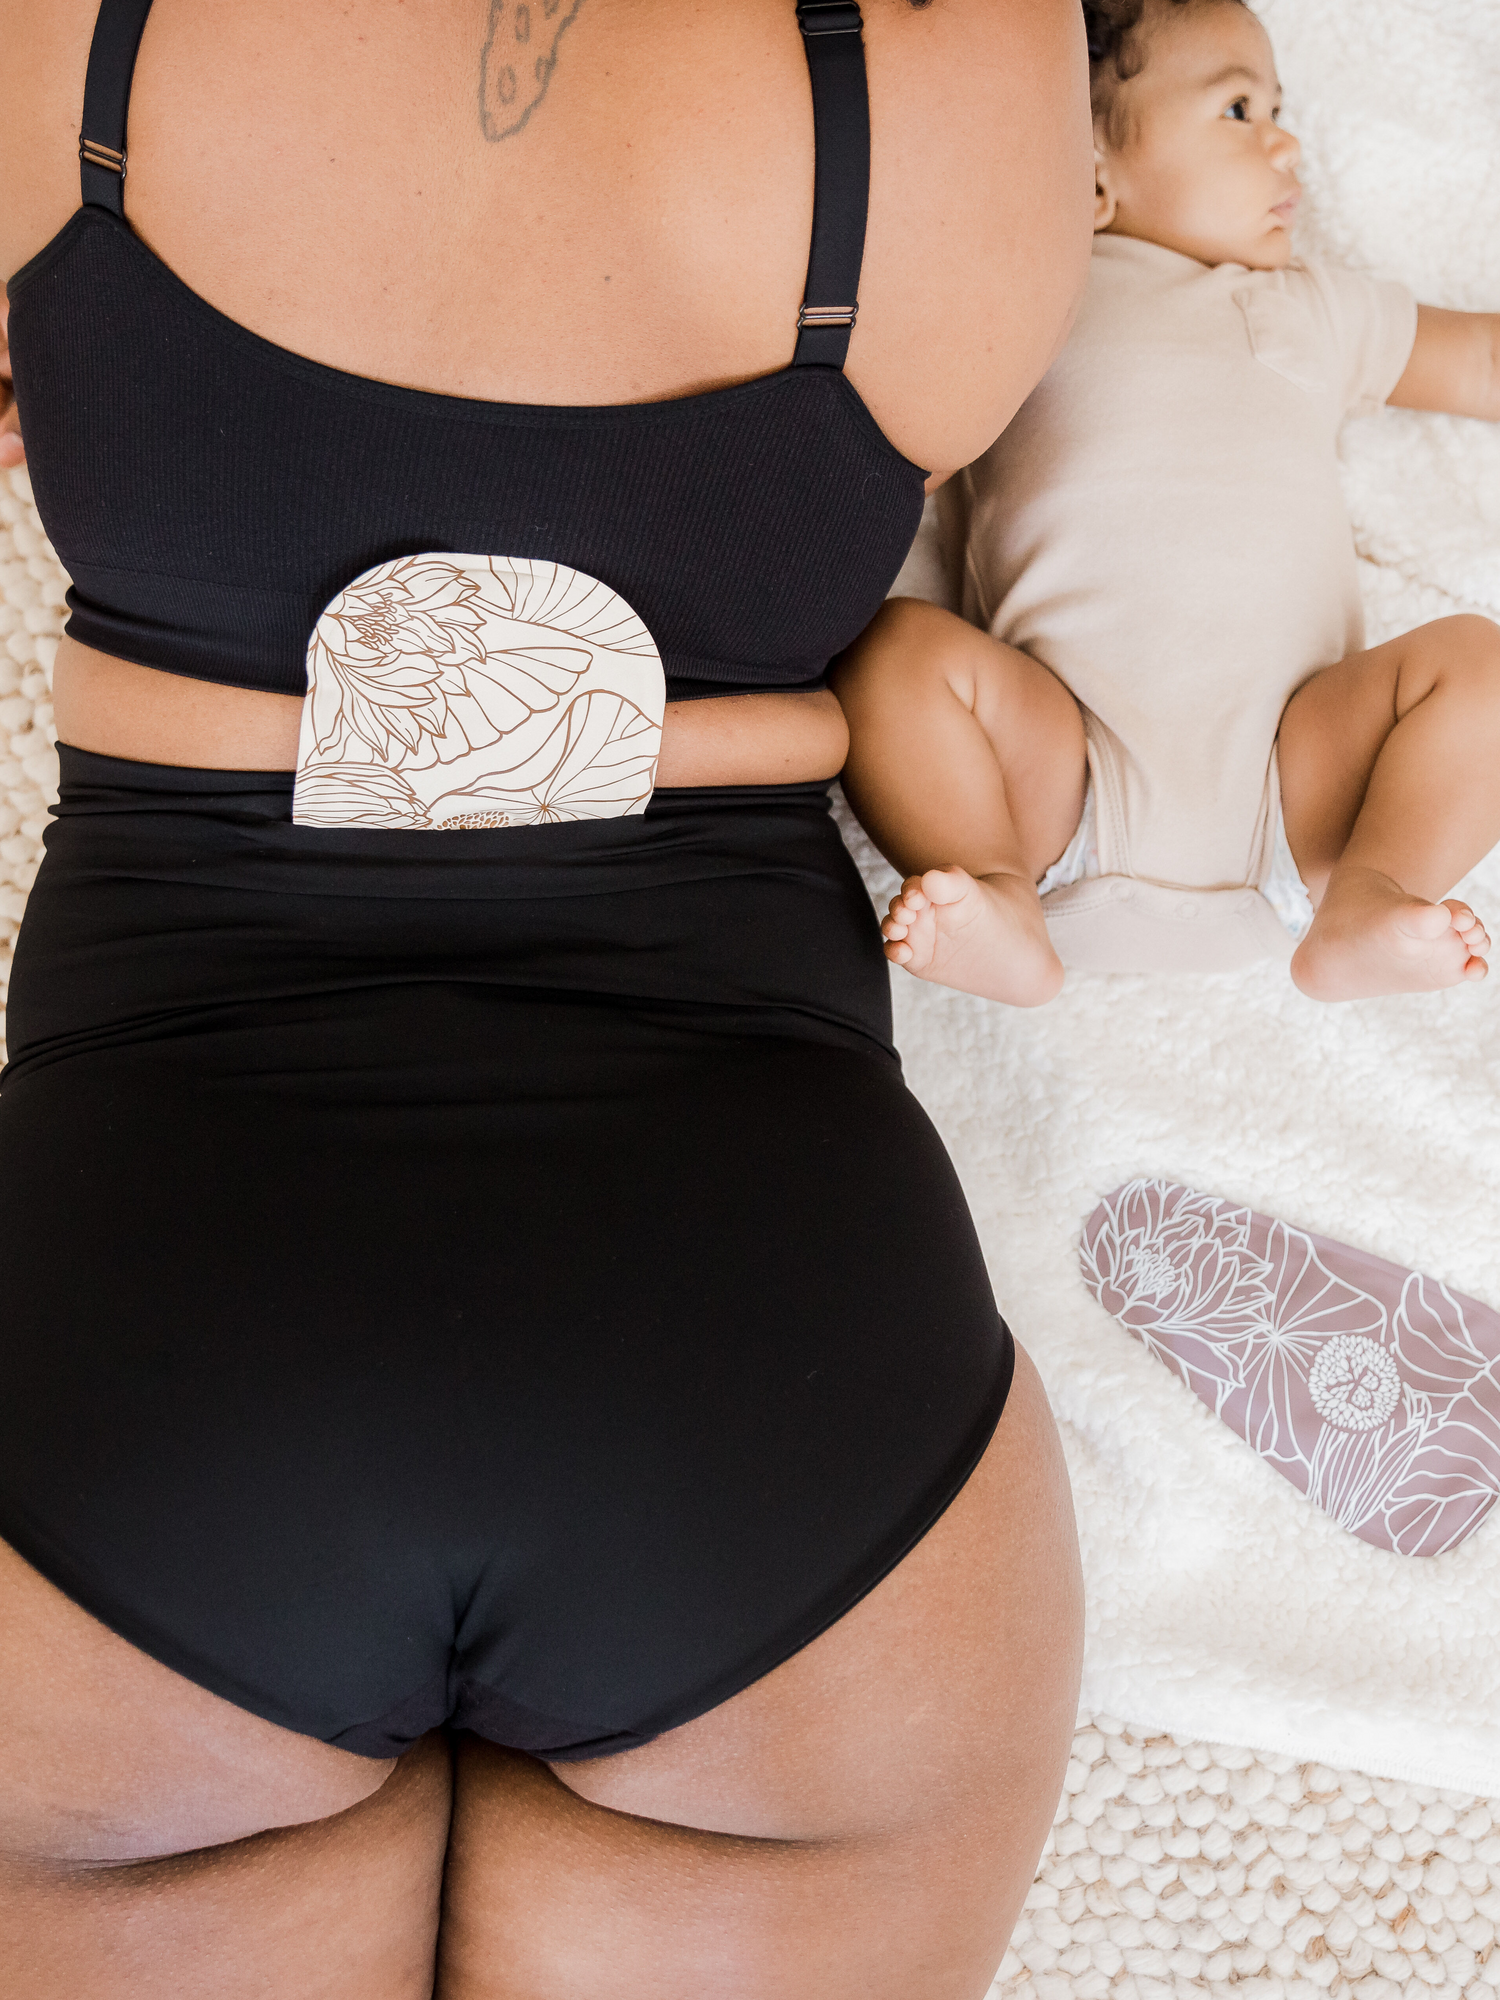 Model laying on a bed next to her baby wearing the Soothing Fourth Trimester Underwear in Black.